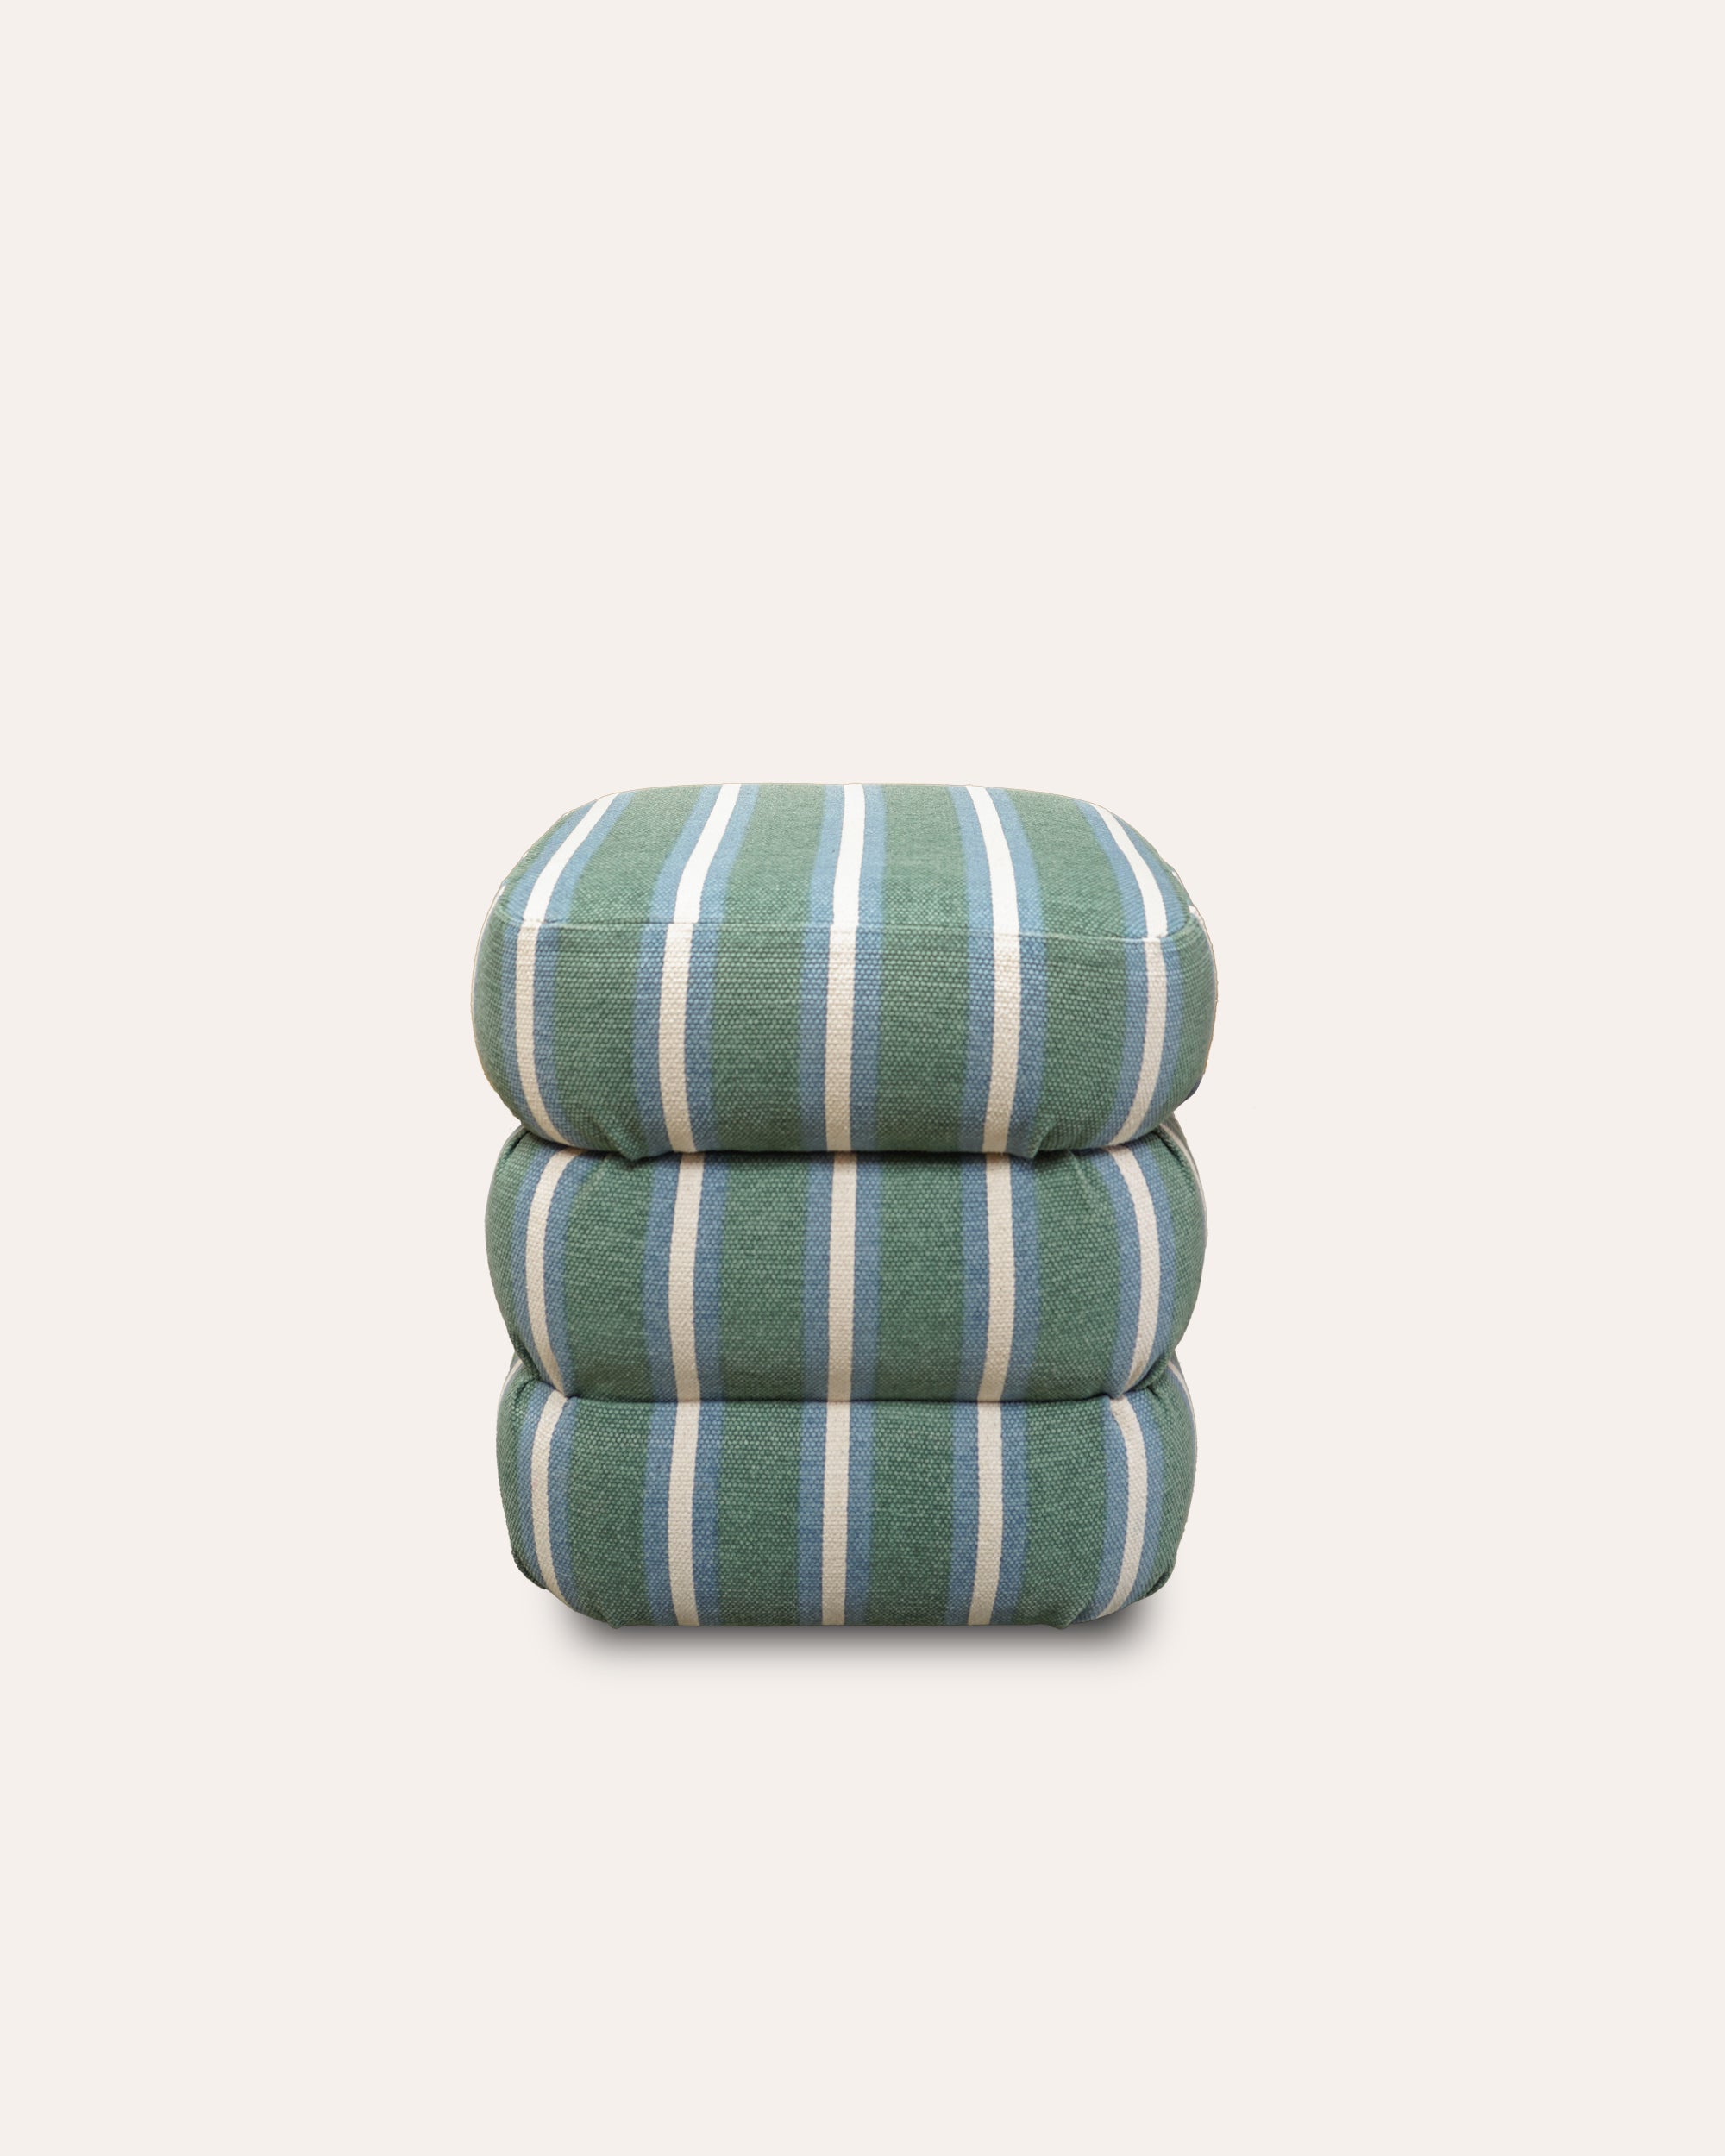 The Stripey Stool - The Blue and Green